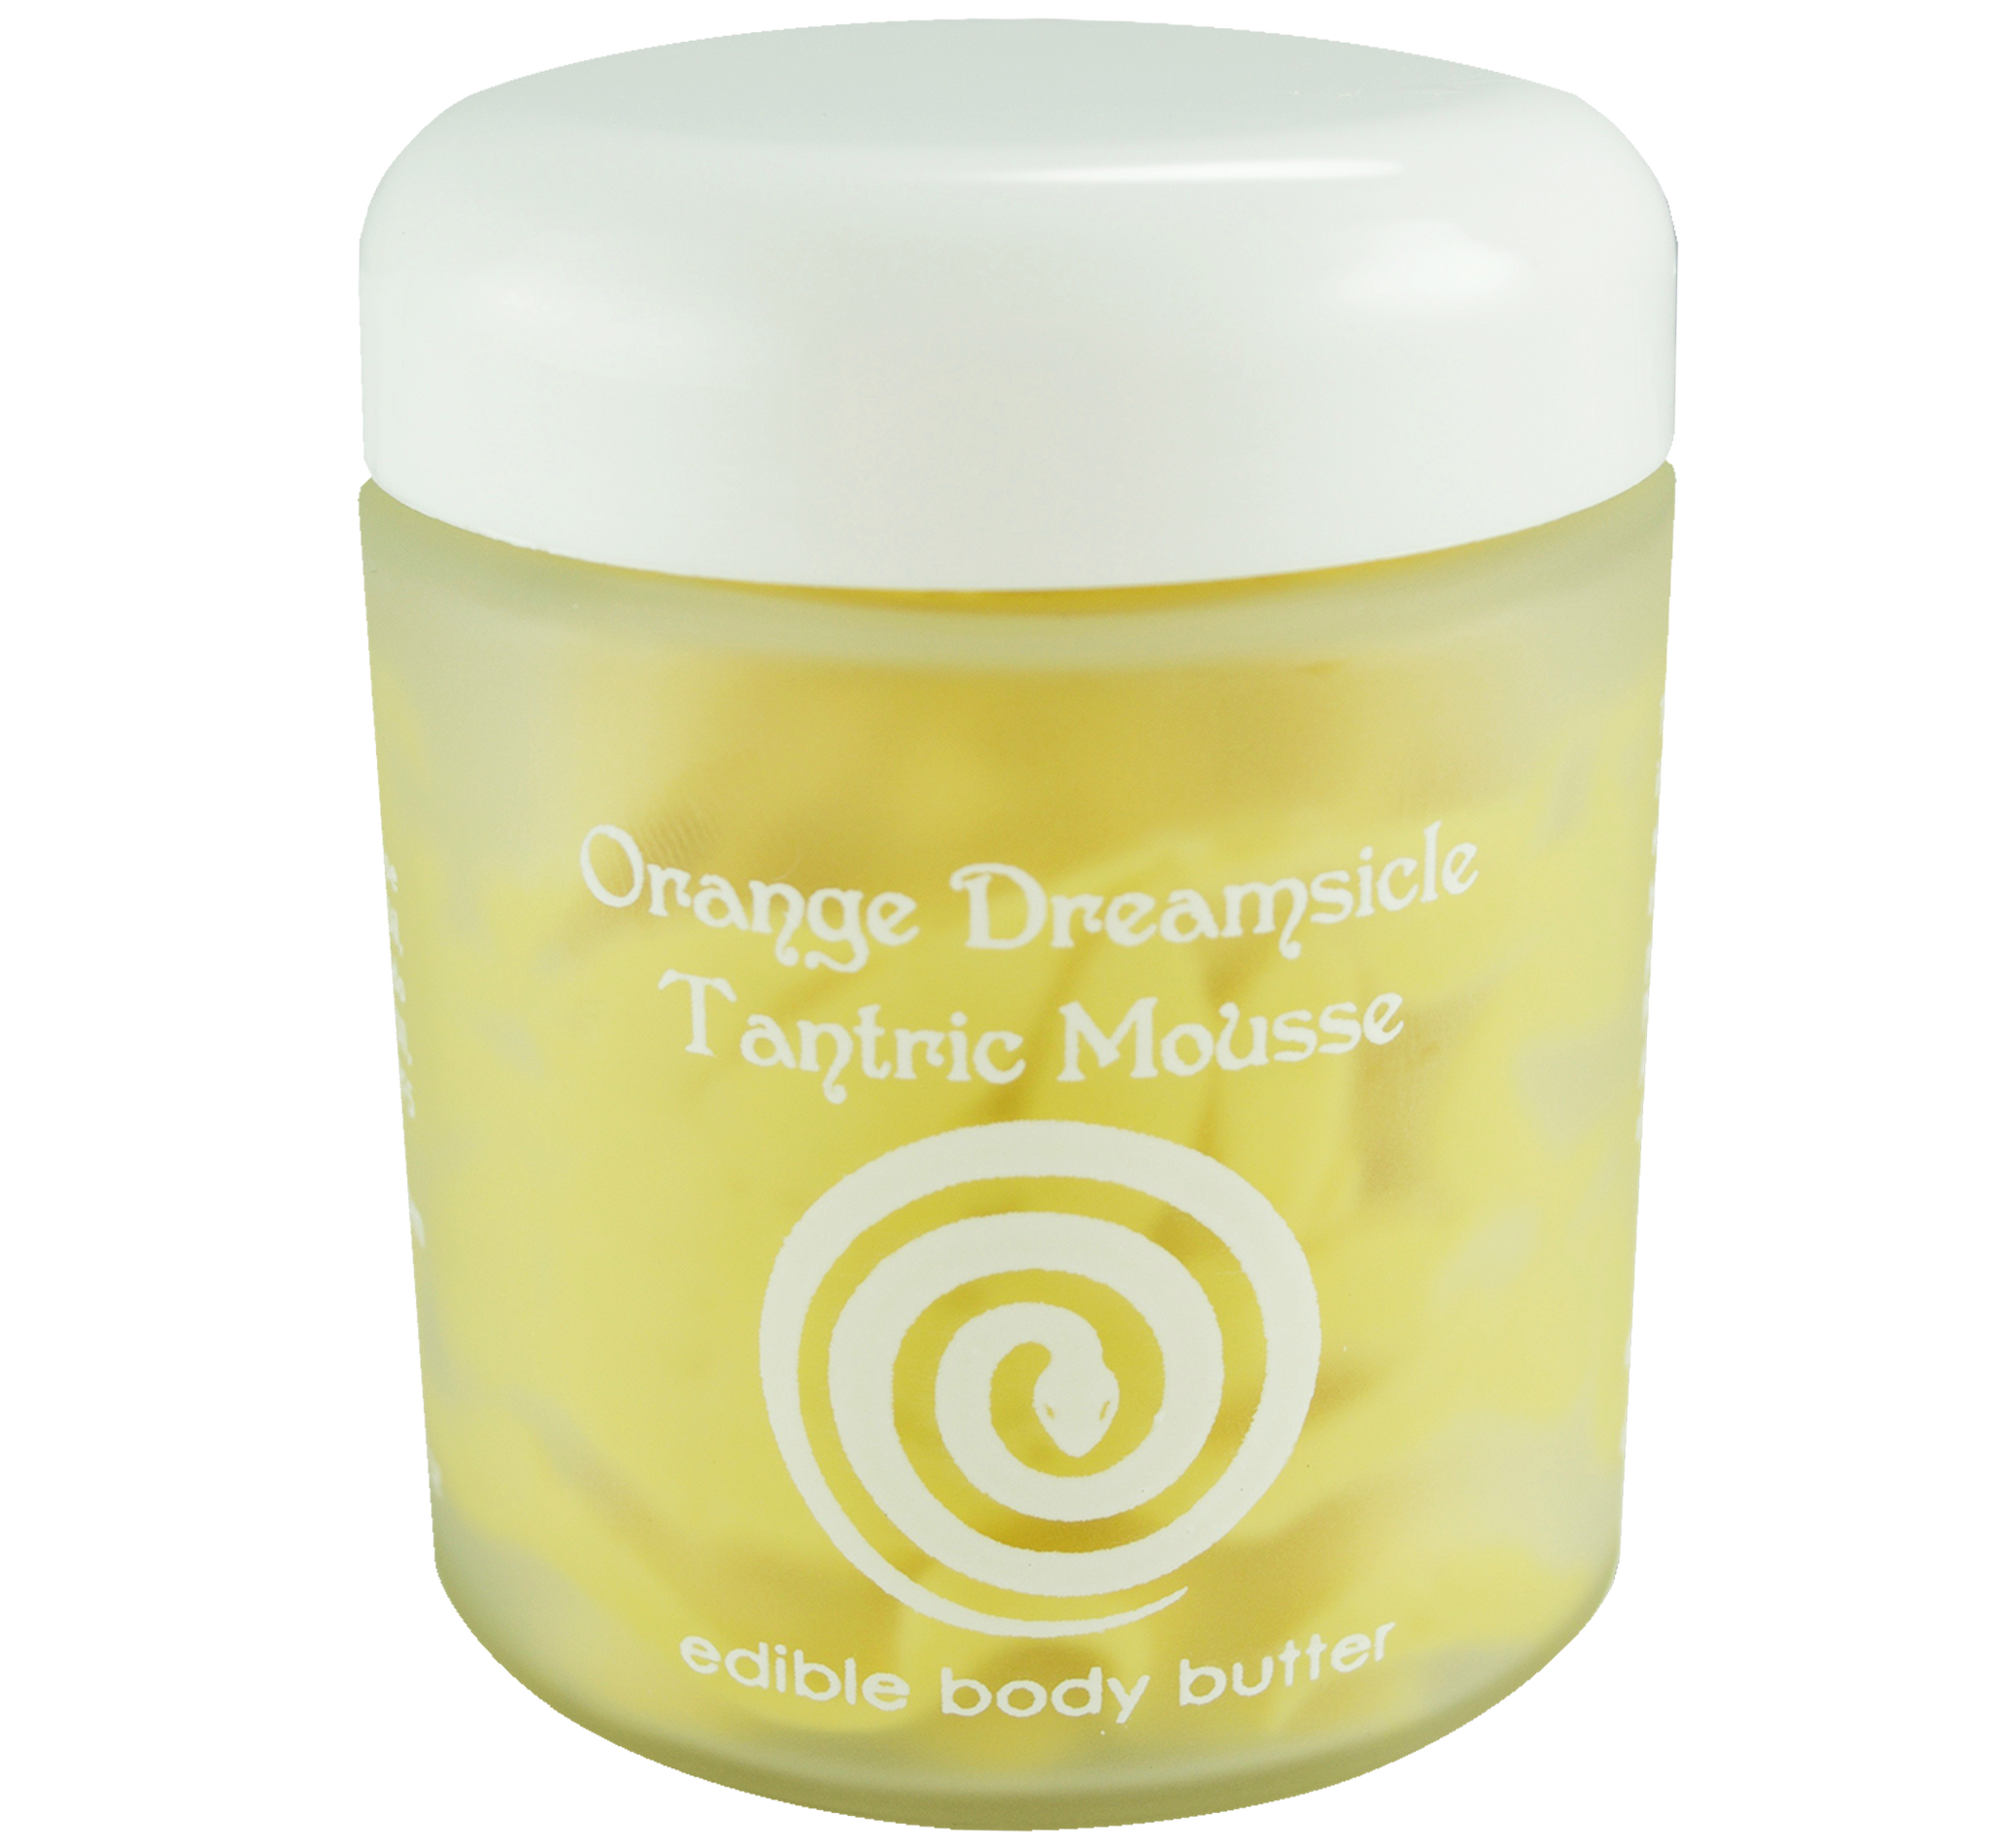 Tantric Mousse ~ orange dreamsicle organic body butter